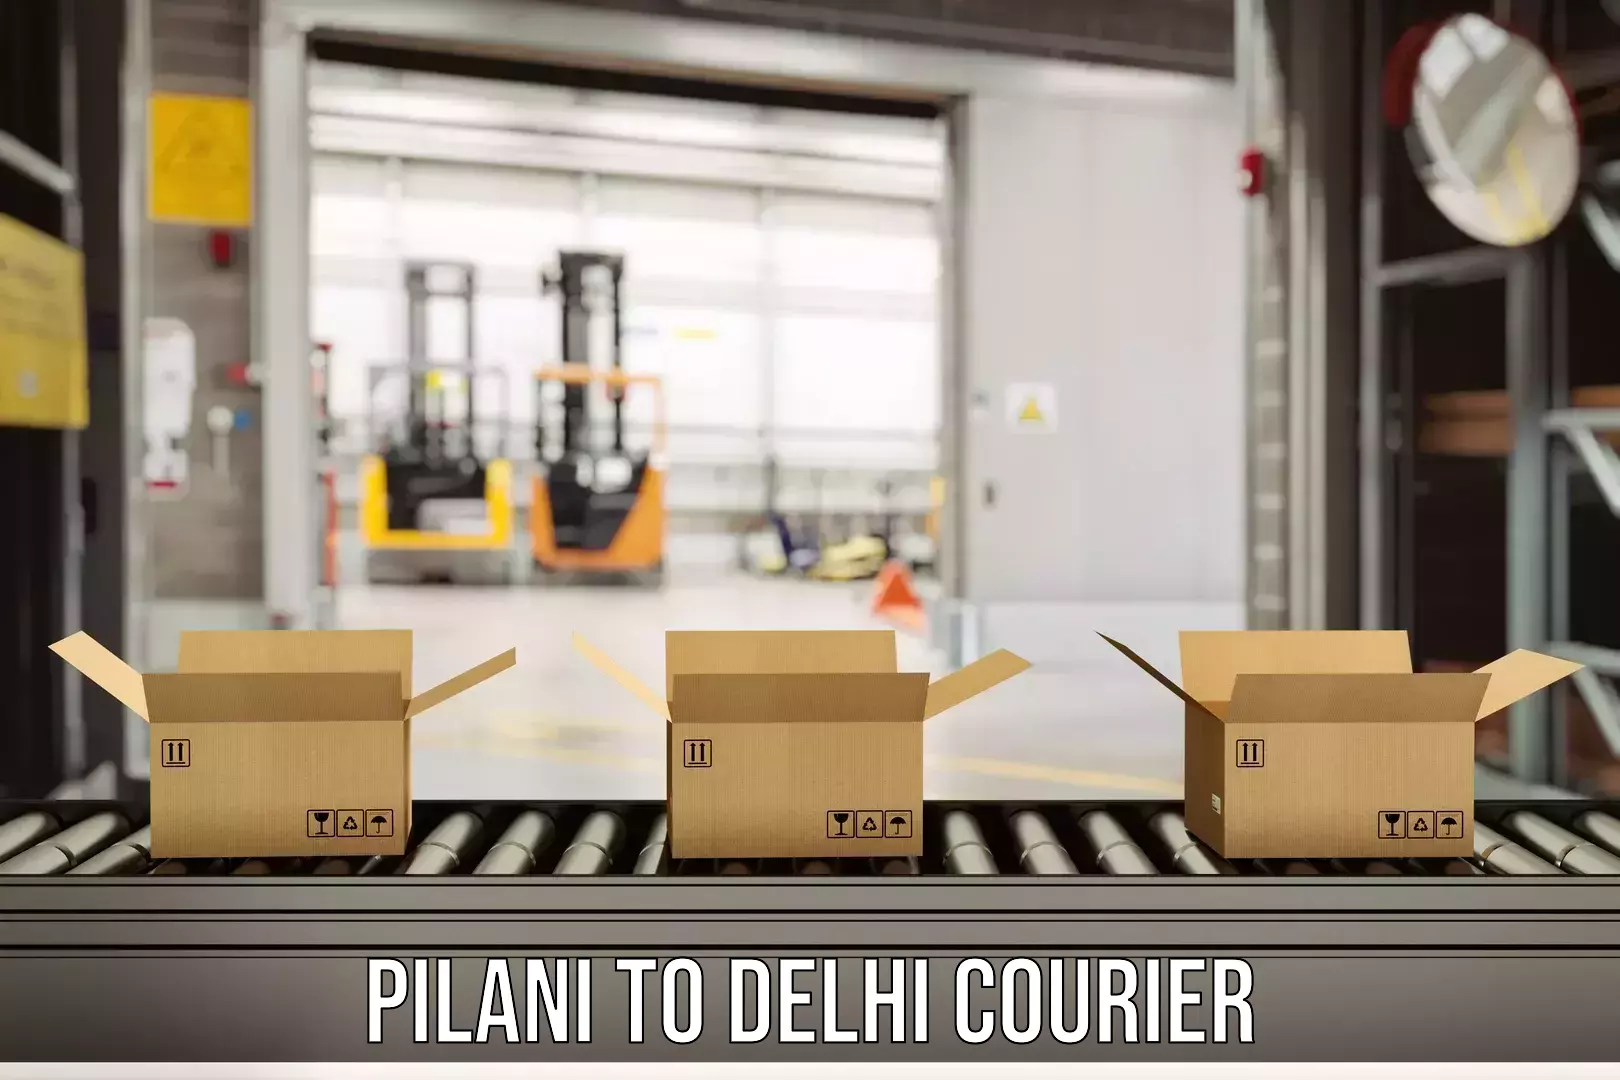 24-hour courier service Pilani to Lodhi Road